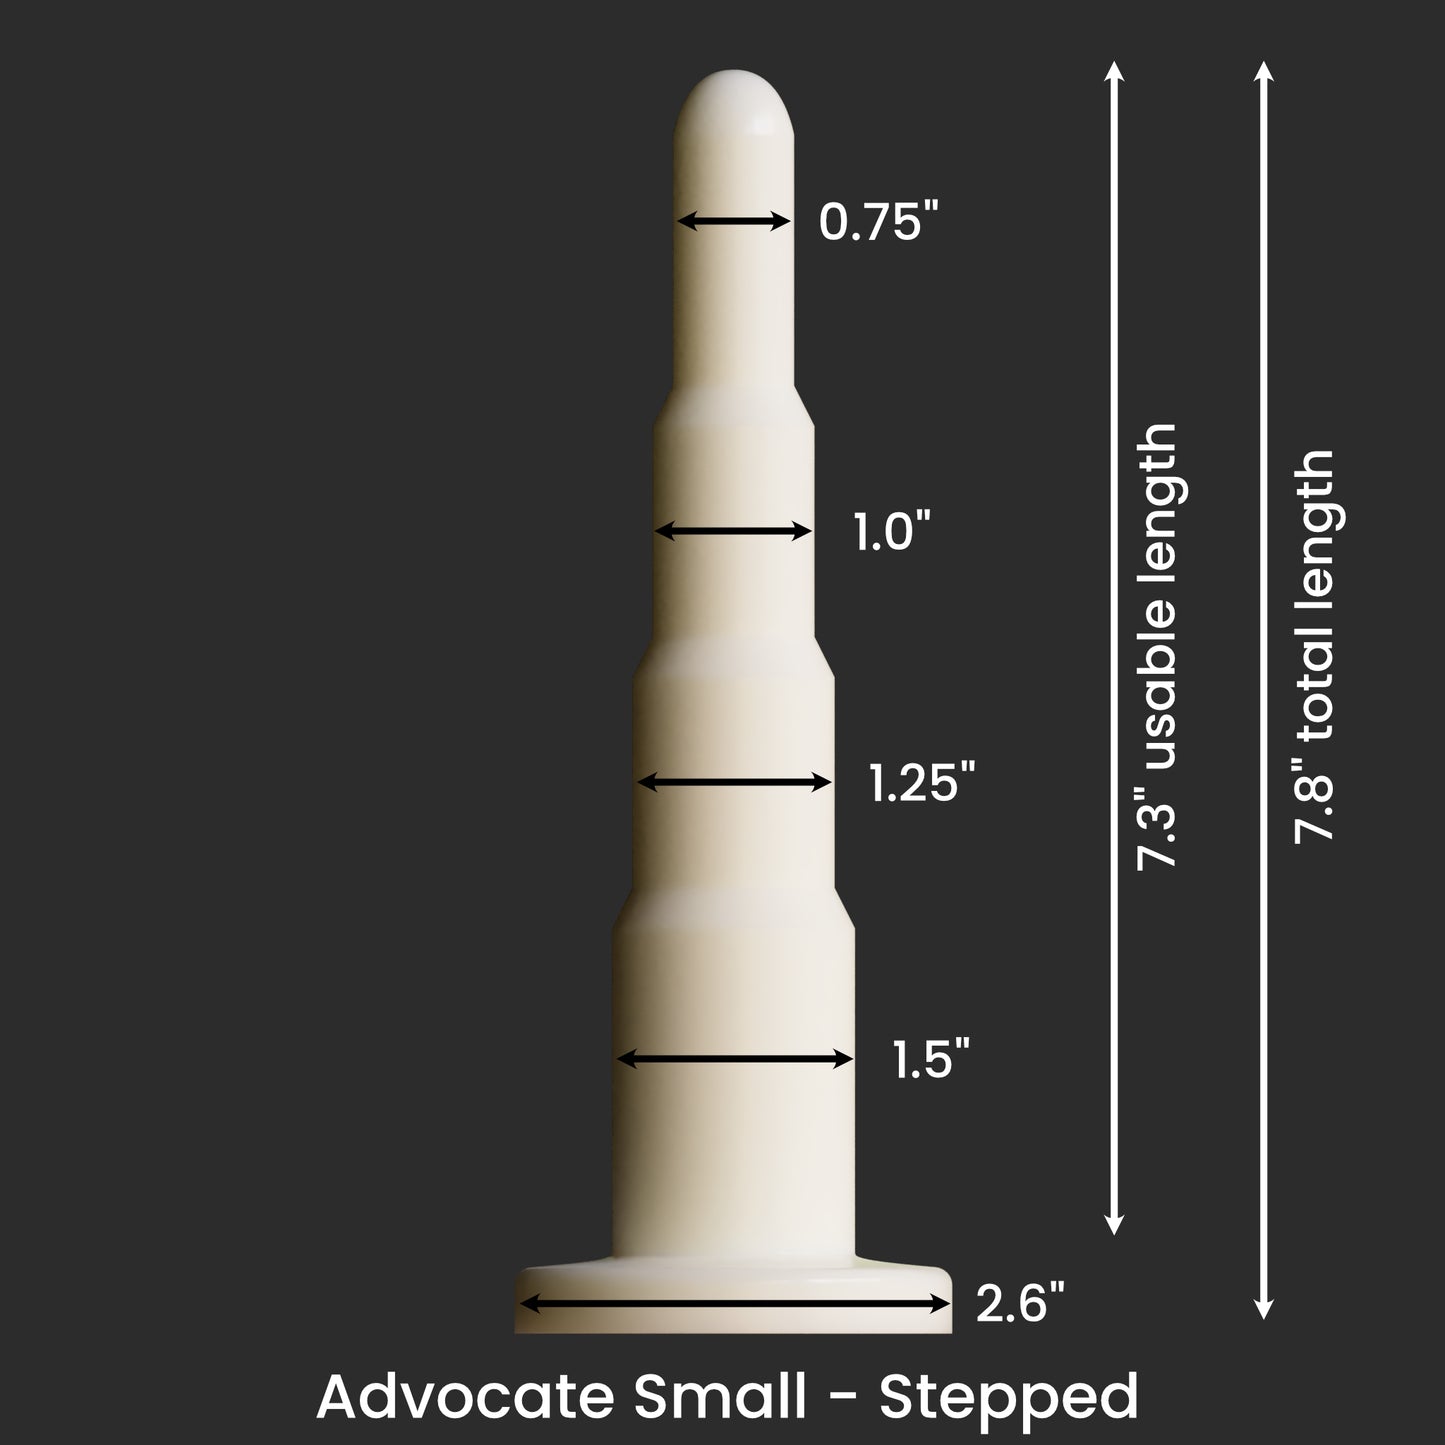 Advocate Small - Stepped